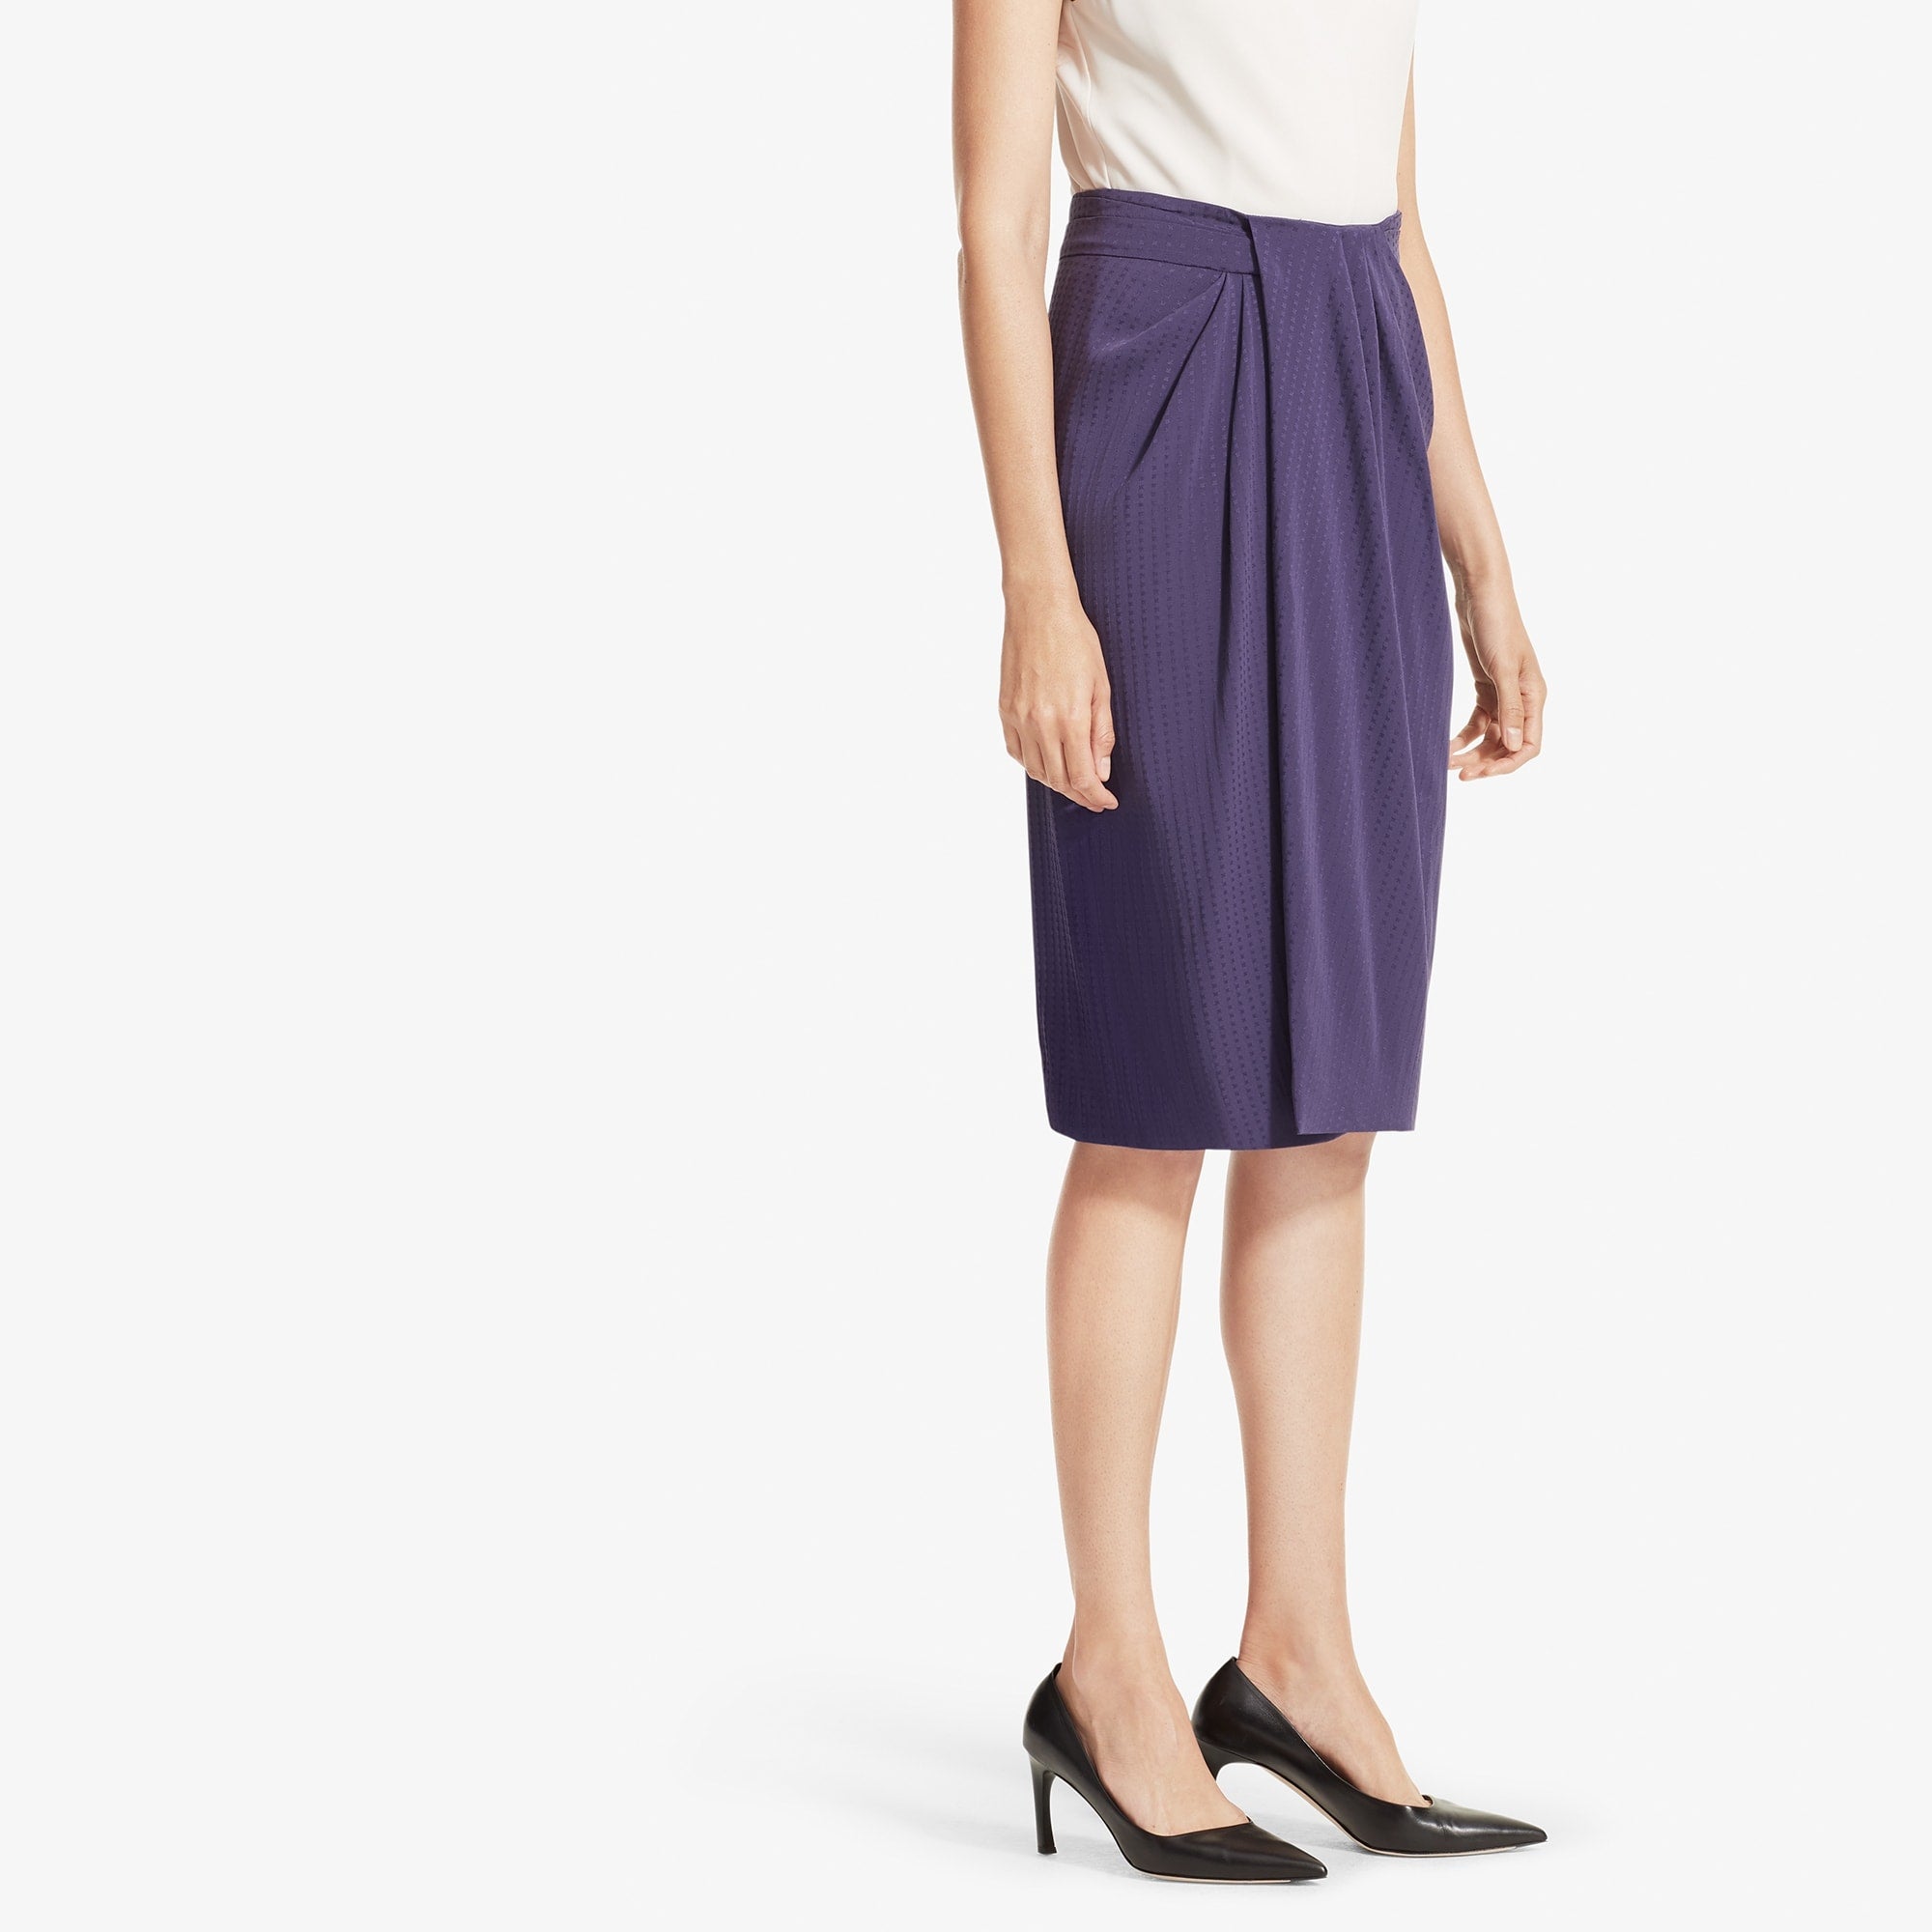 Side image of a woman standing wearing the Lenox skirt foulard in Iolite